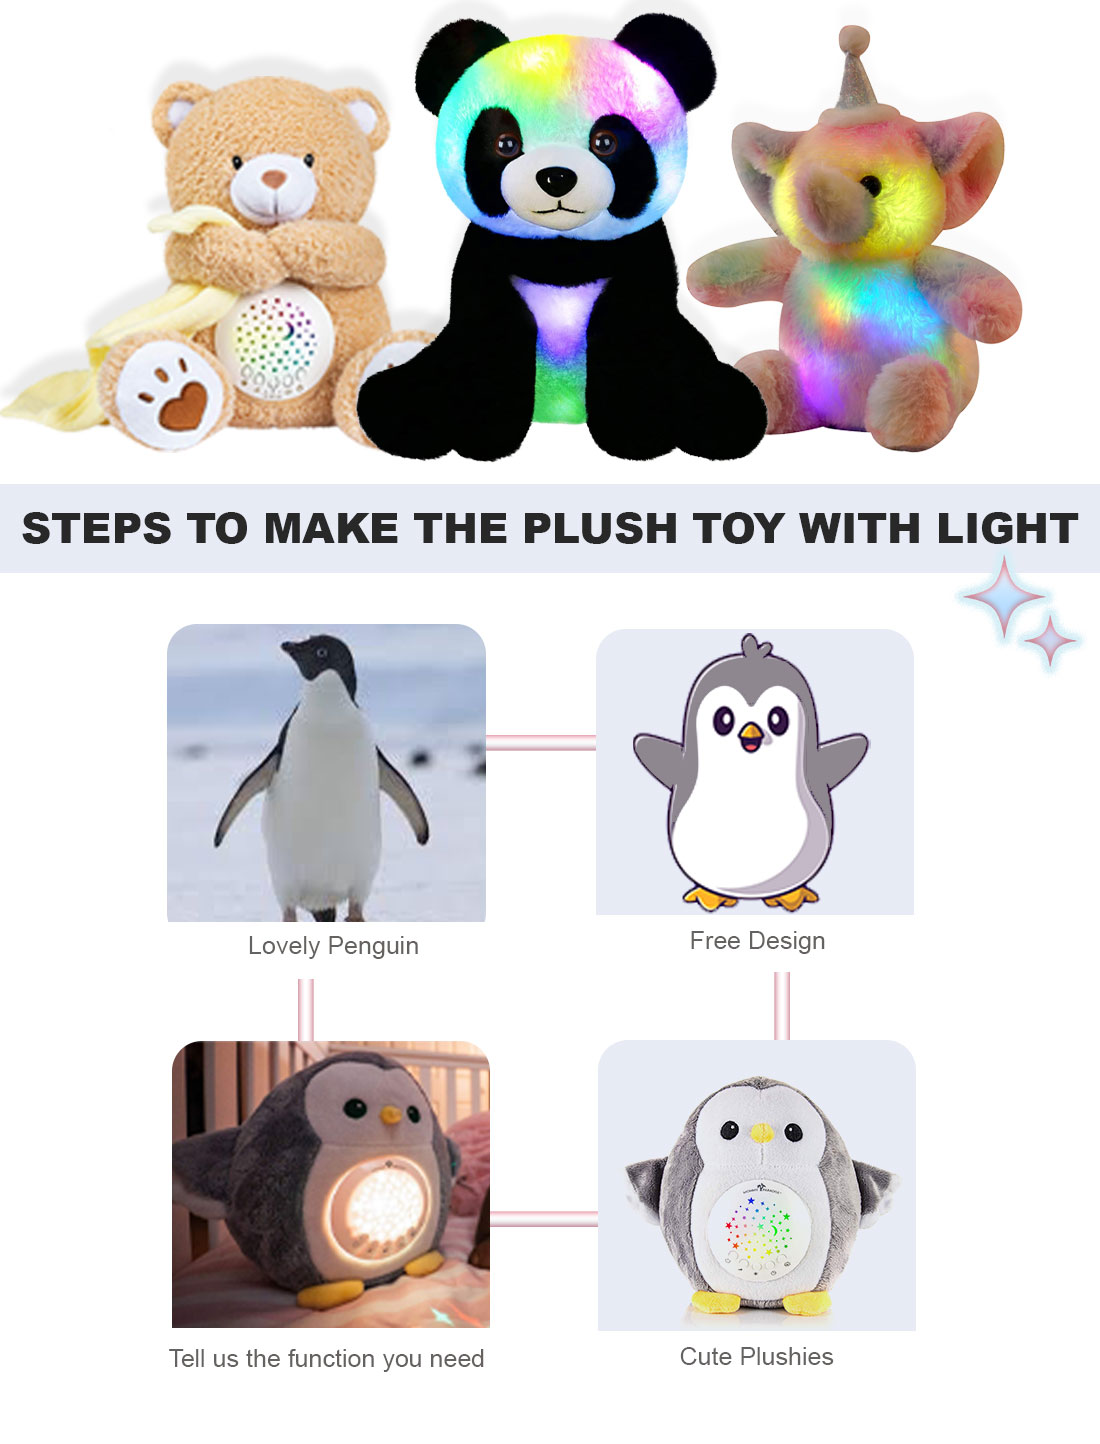 how to build custom plush toy with led light